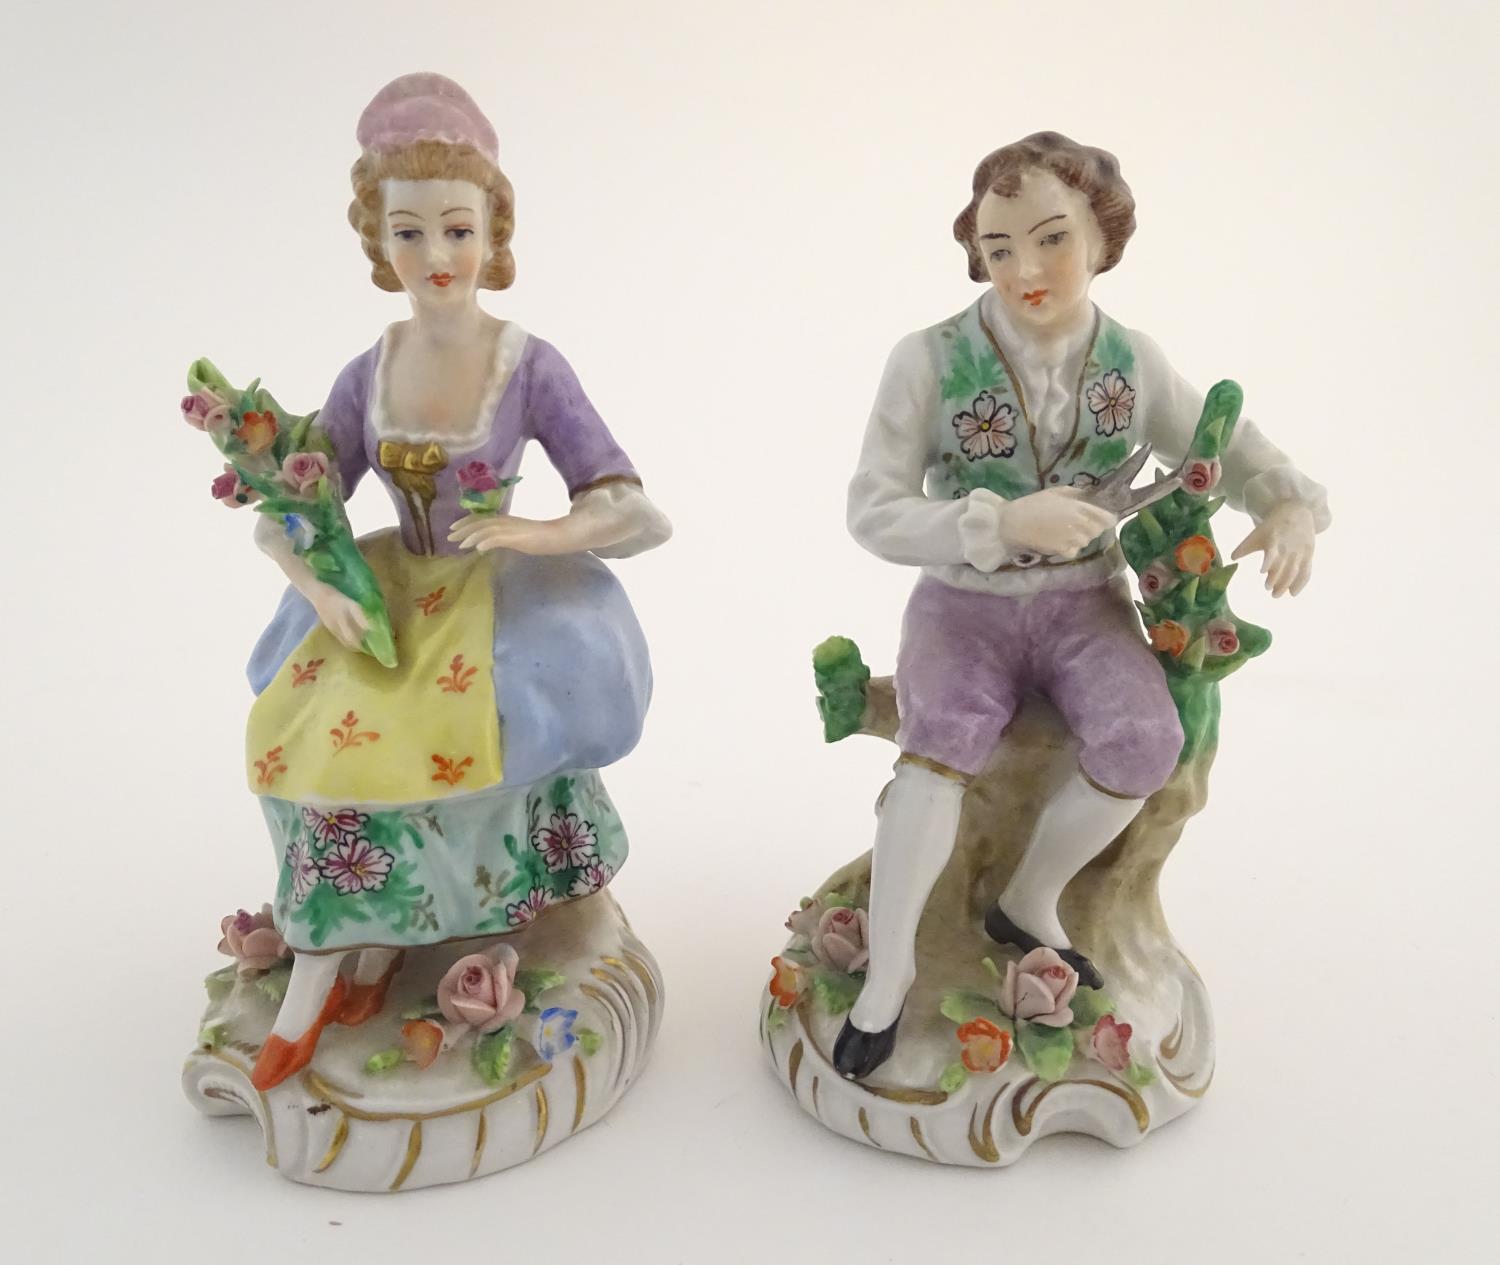 A pair of German Sitzendorf porcelain florist figures, a gentleman and lady, each seated on a